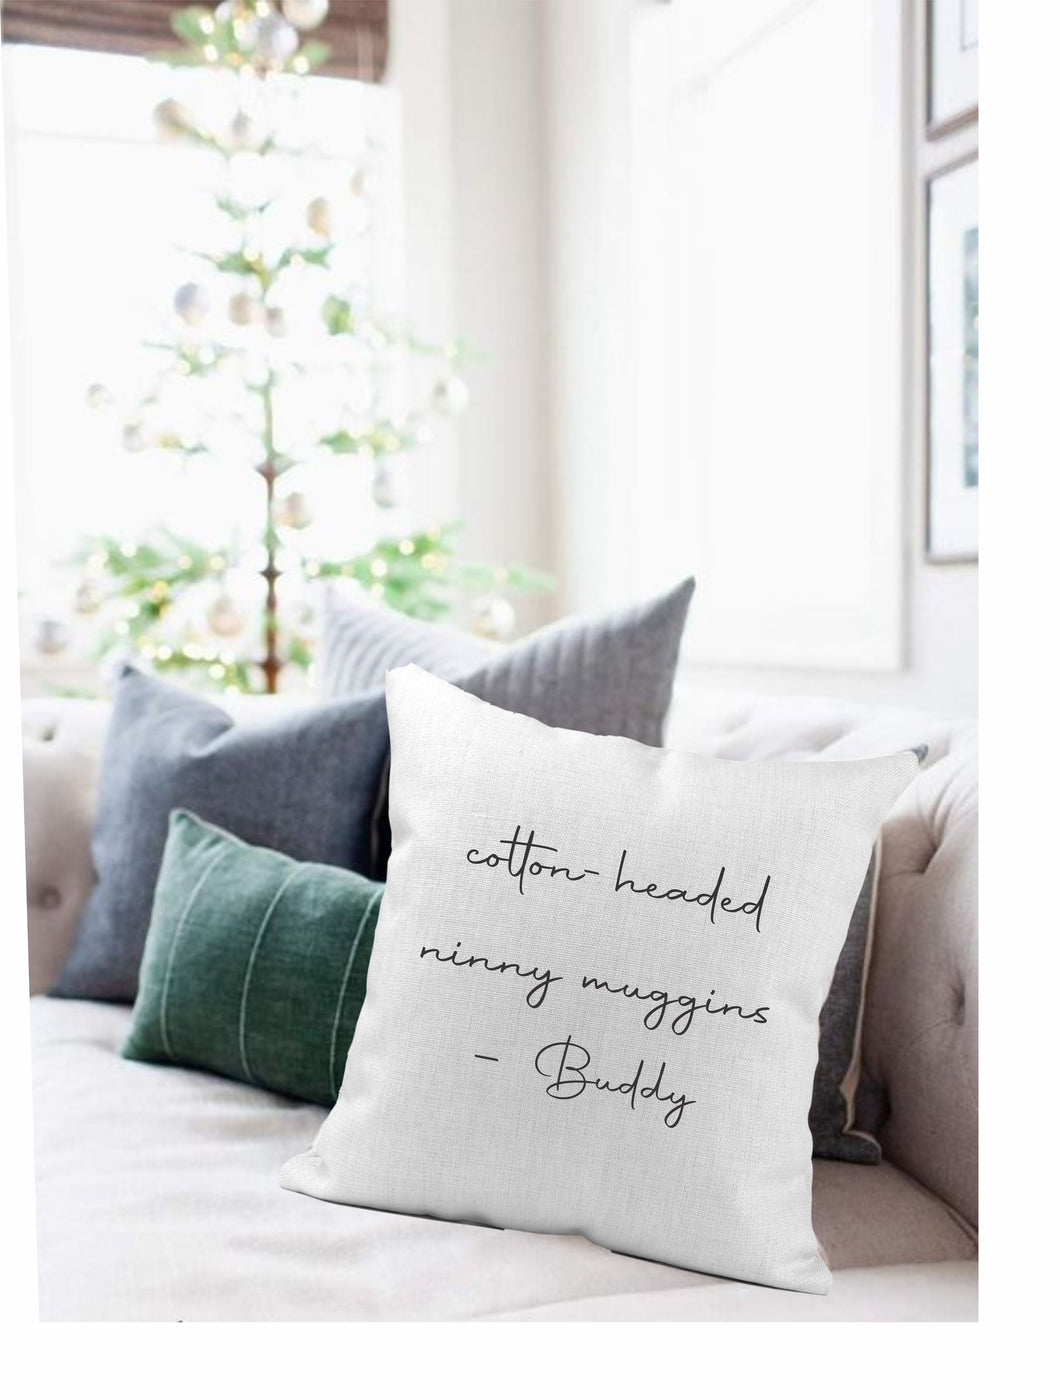 Cotton Headed Ninny Muggins Quote Pillow Cover